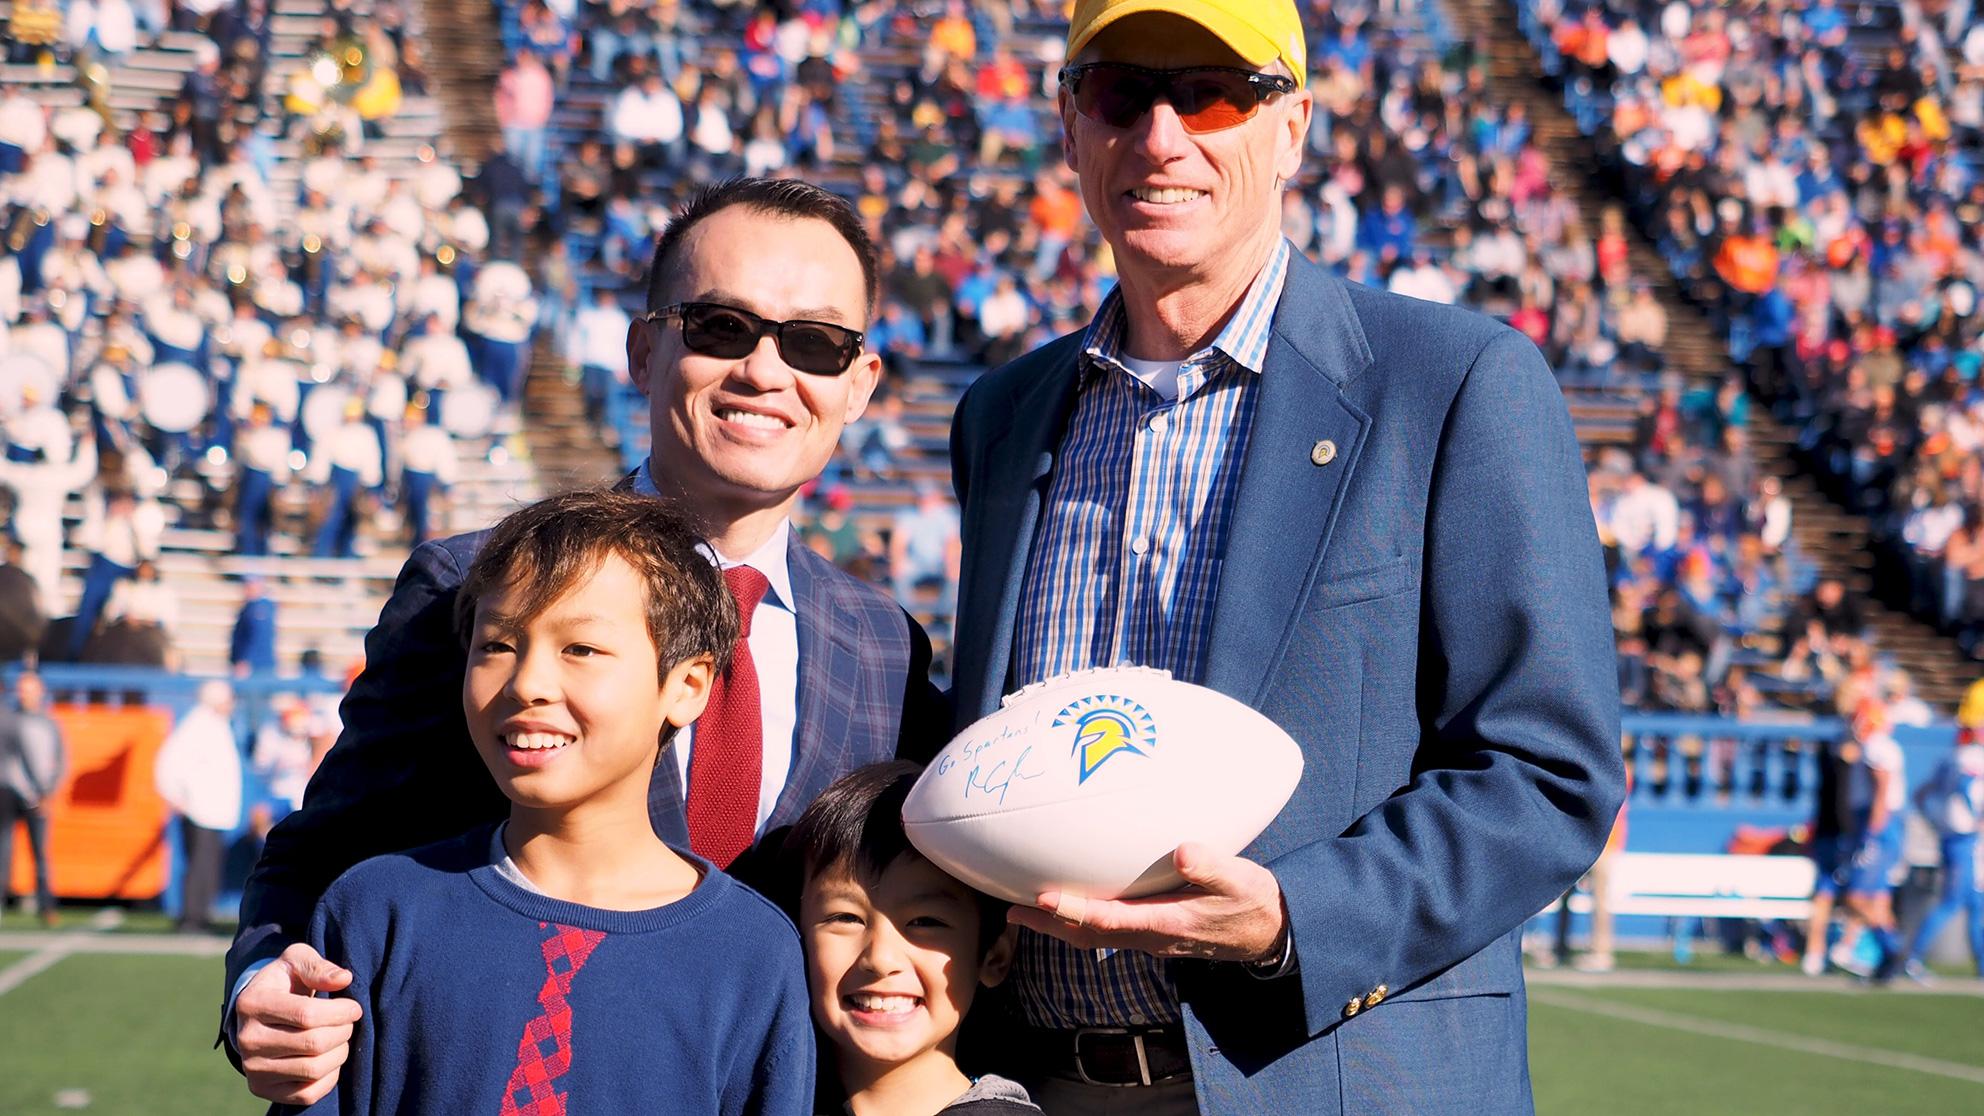 A father with his two young boys next to a tall man holding a football